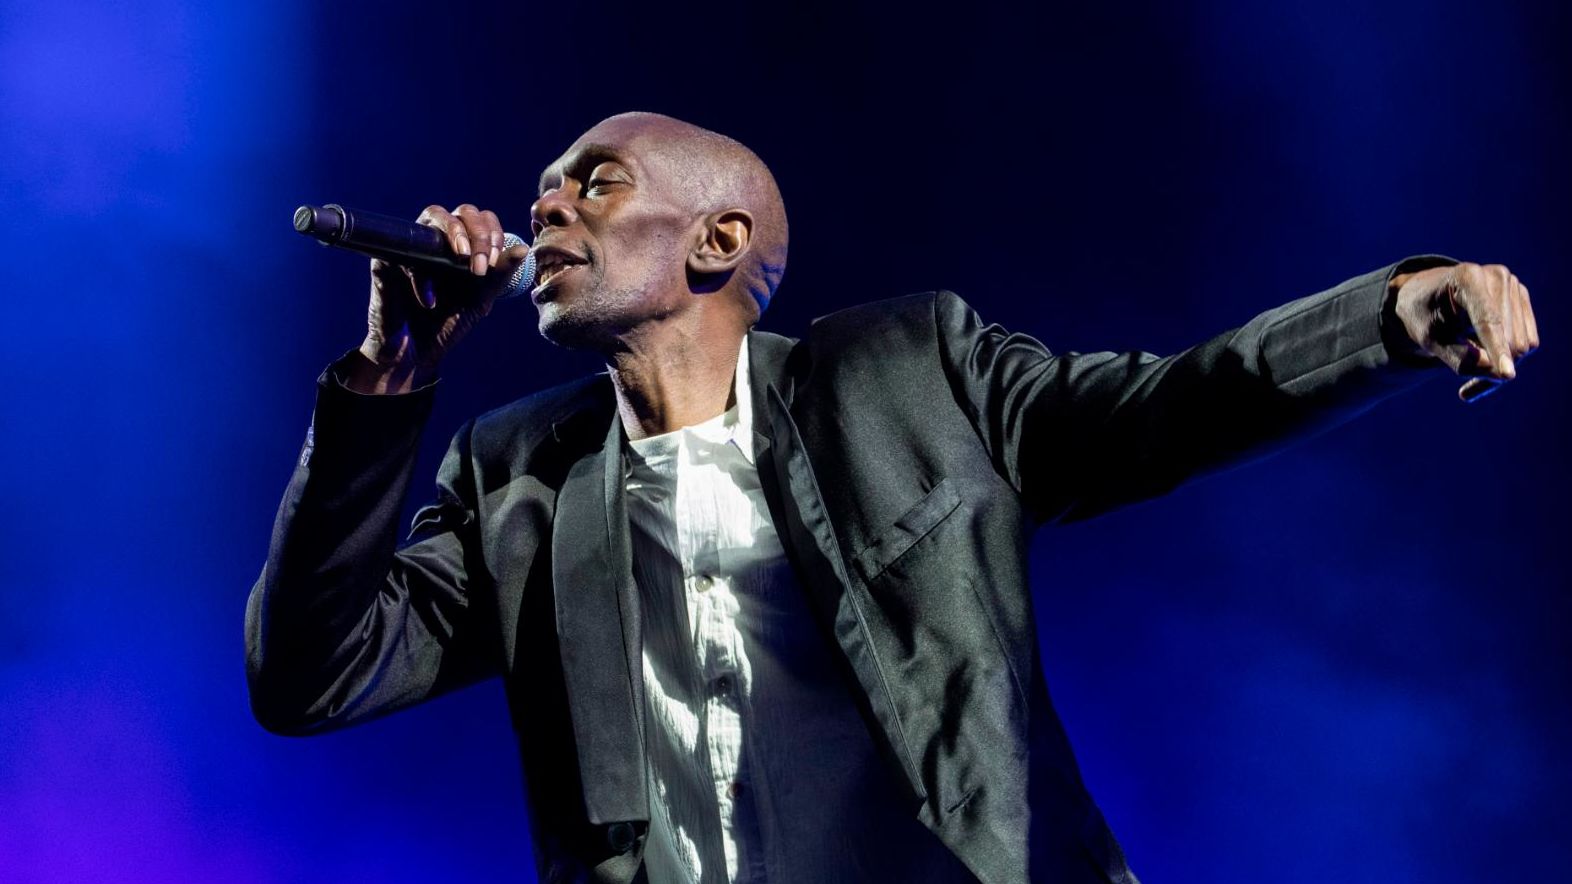 <a href="https://www.cnn.com/2022/12/24/entertainment/maxi-jazz-faithless-singer-death/index.html" target="_blank">Maxi Jazz,</a> lead vocalist of the British dance group Faithless, died on December 23. He was 65.